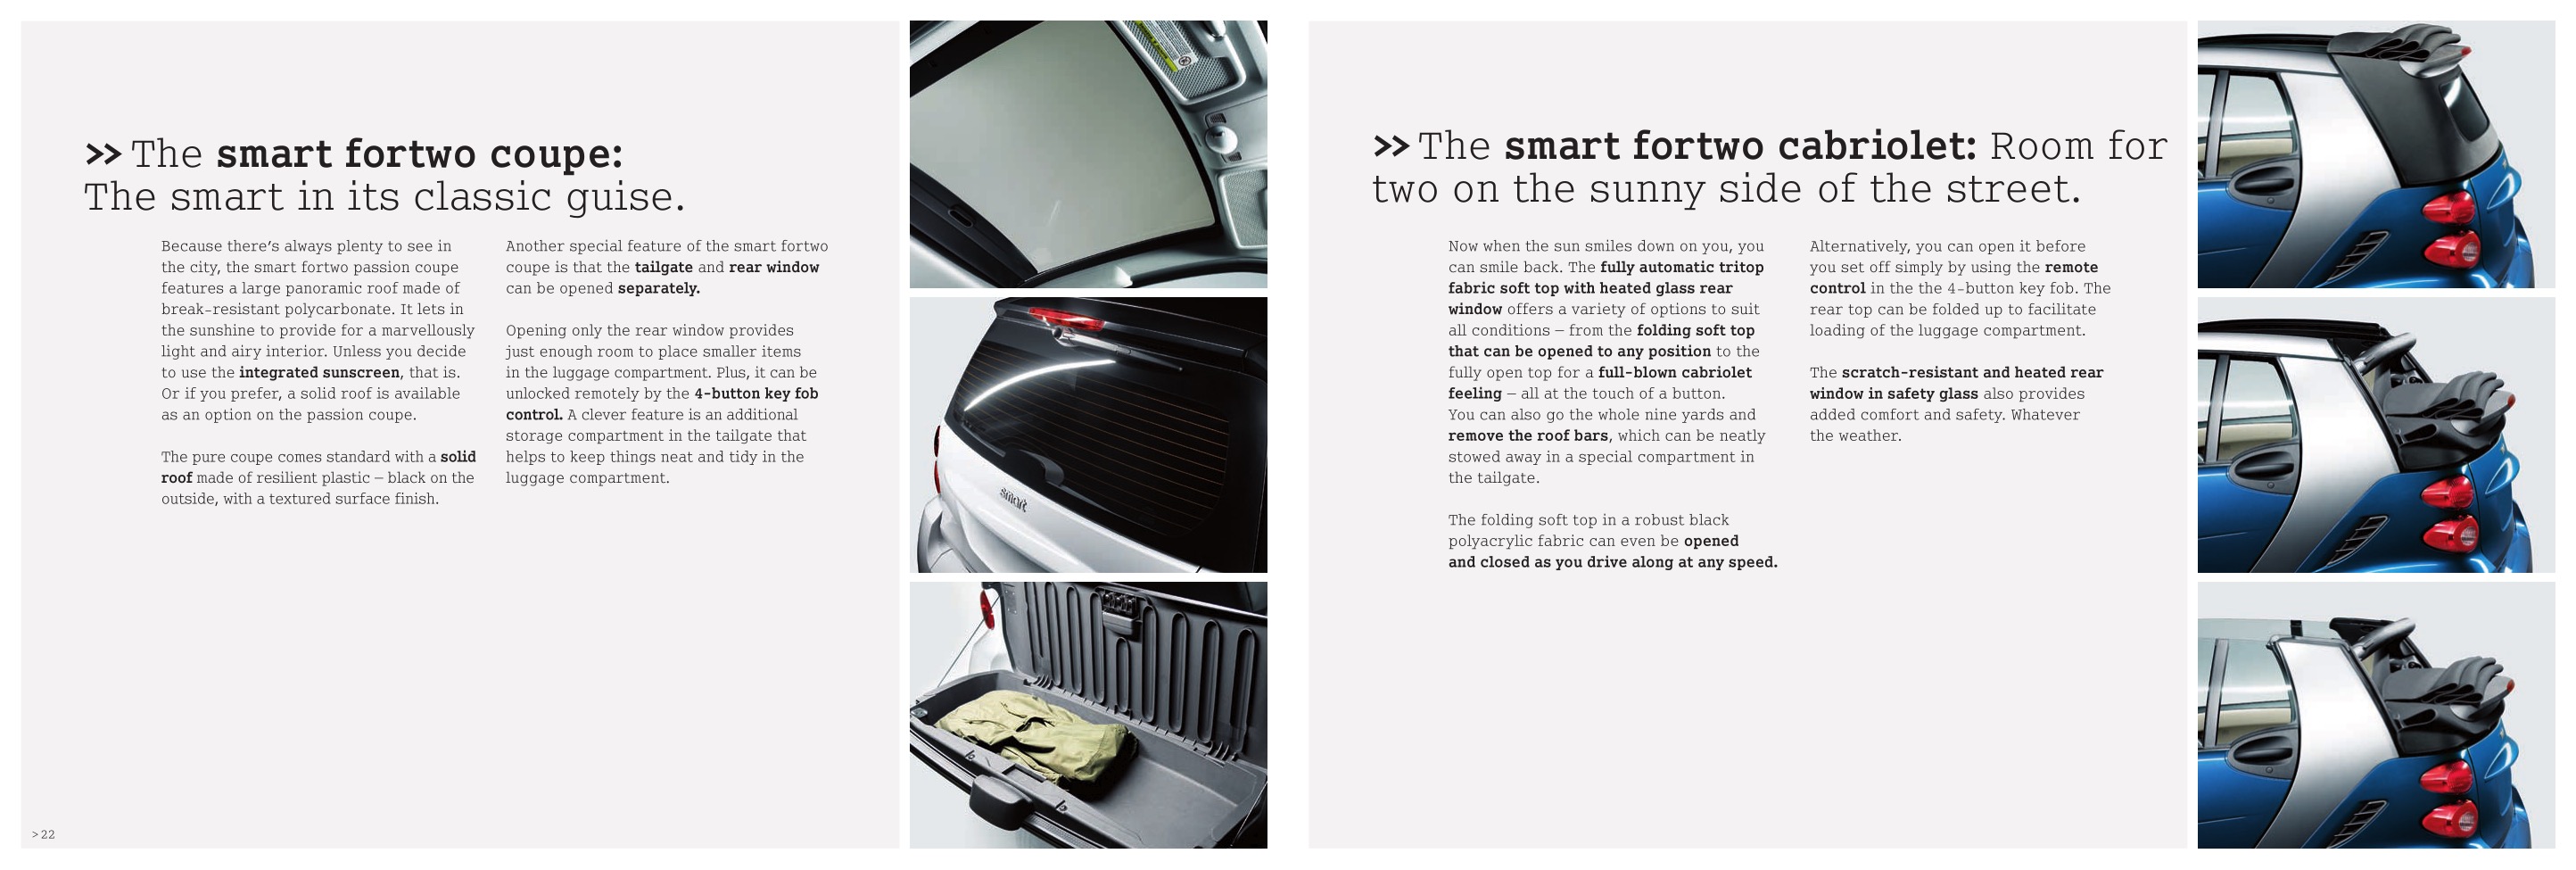 2009 Smart Fortwo Brochure Page 19